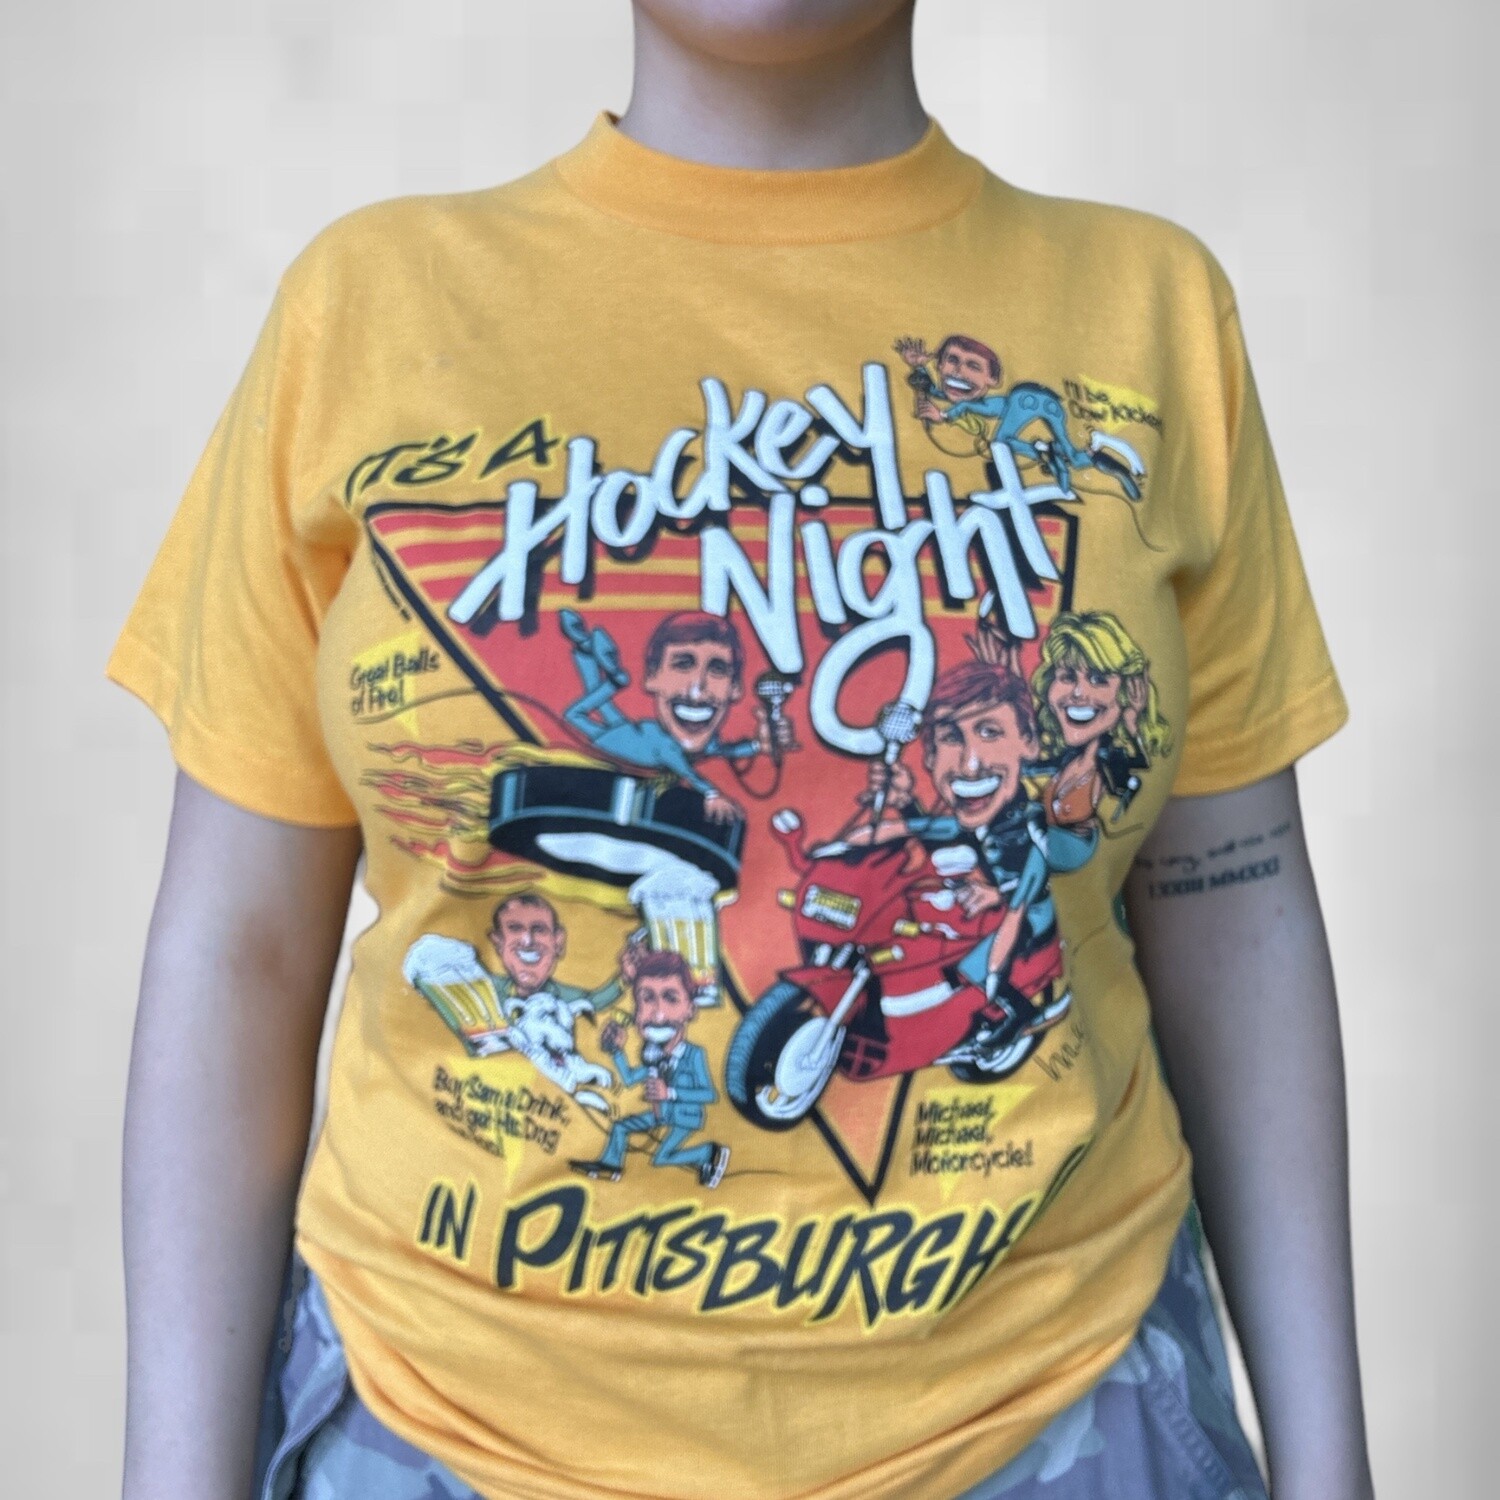 Vintage 1989 It’s A Hockey Night Penguins Tee, Size: Medium, Color: Yellow, Style: Pittsburgh